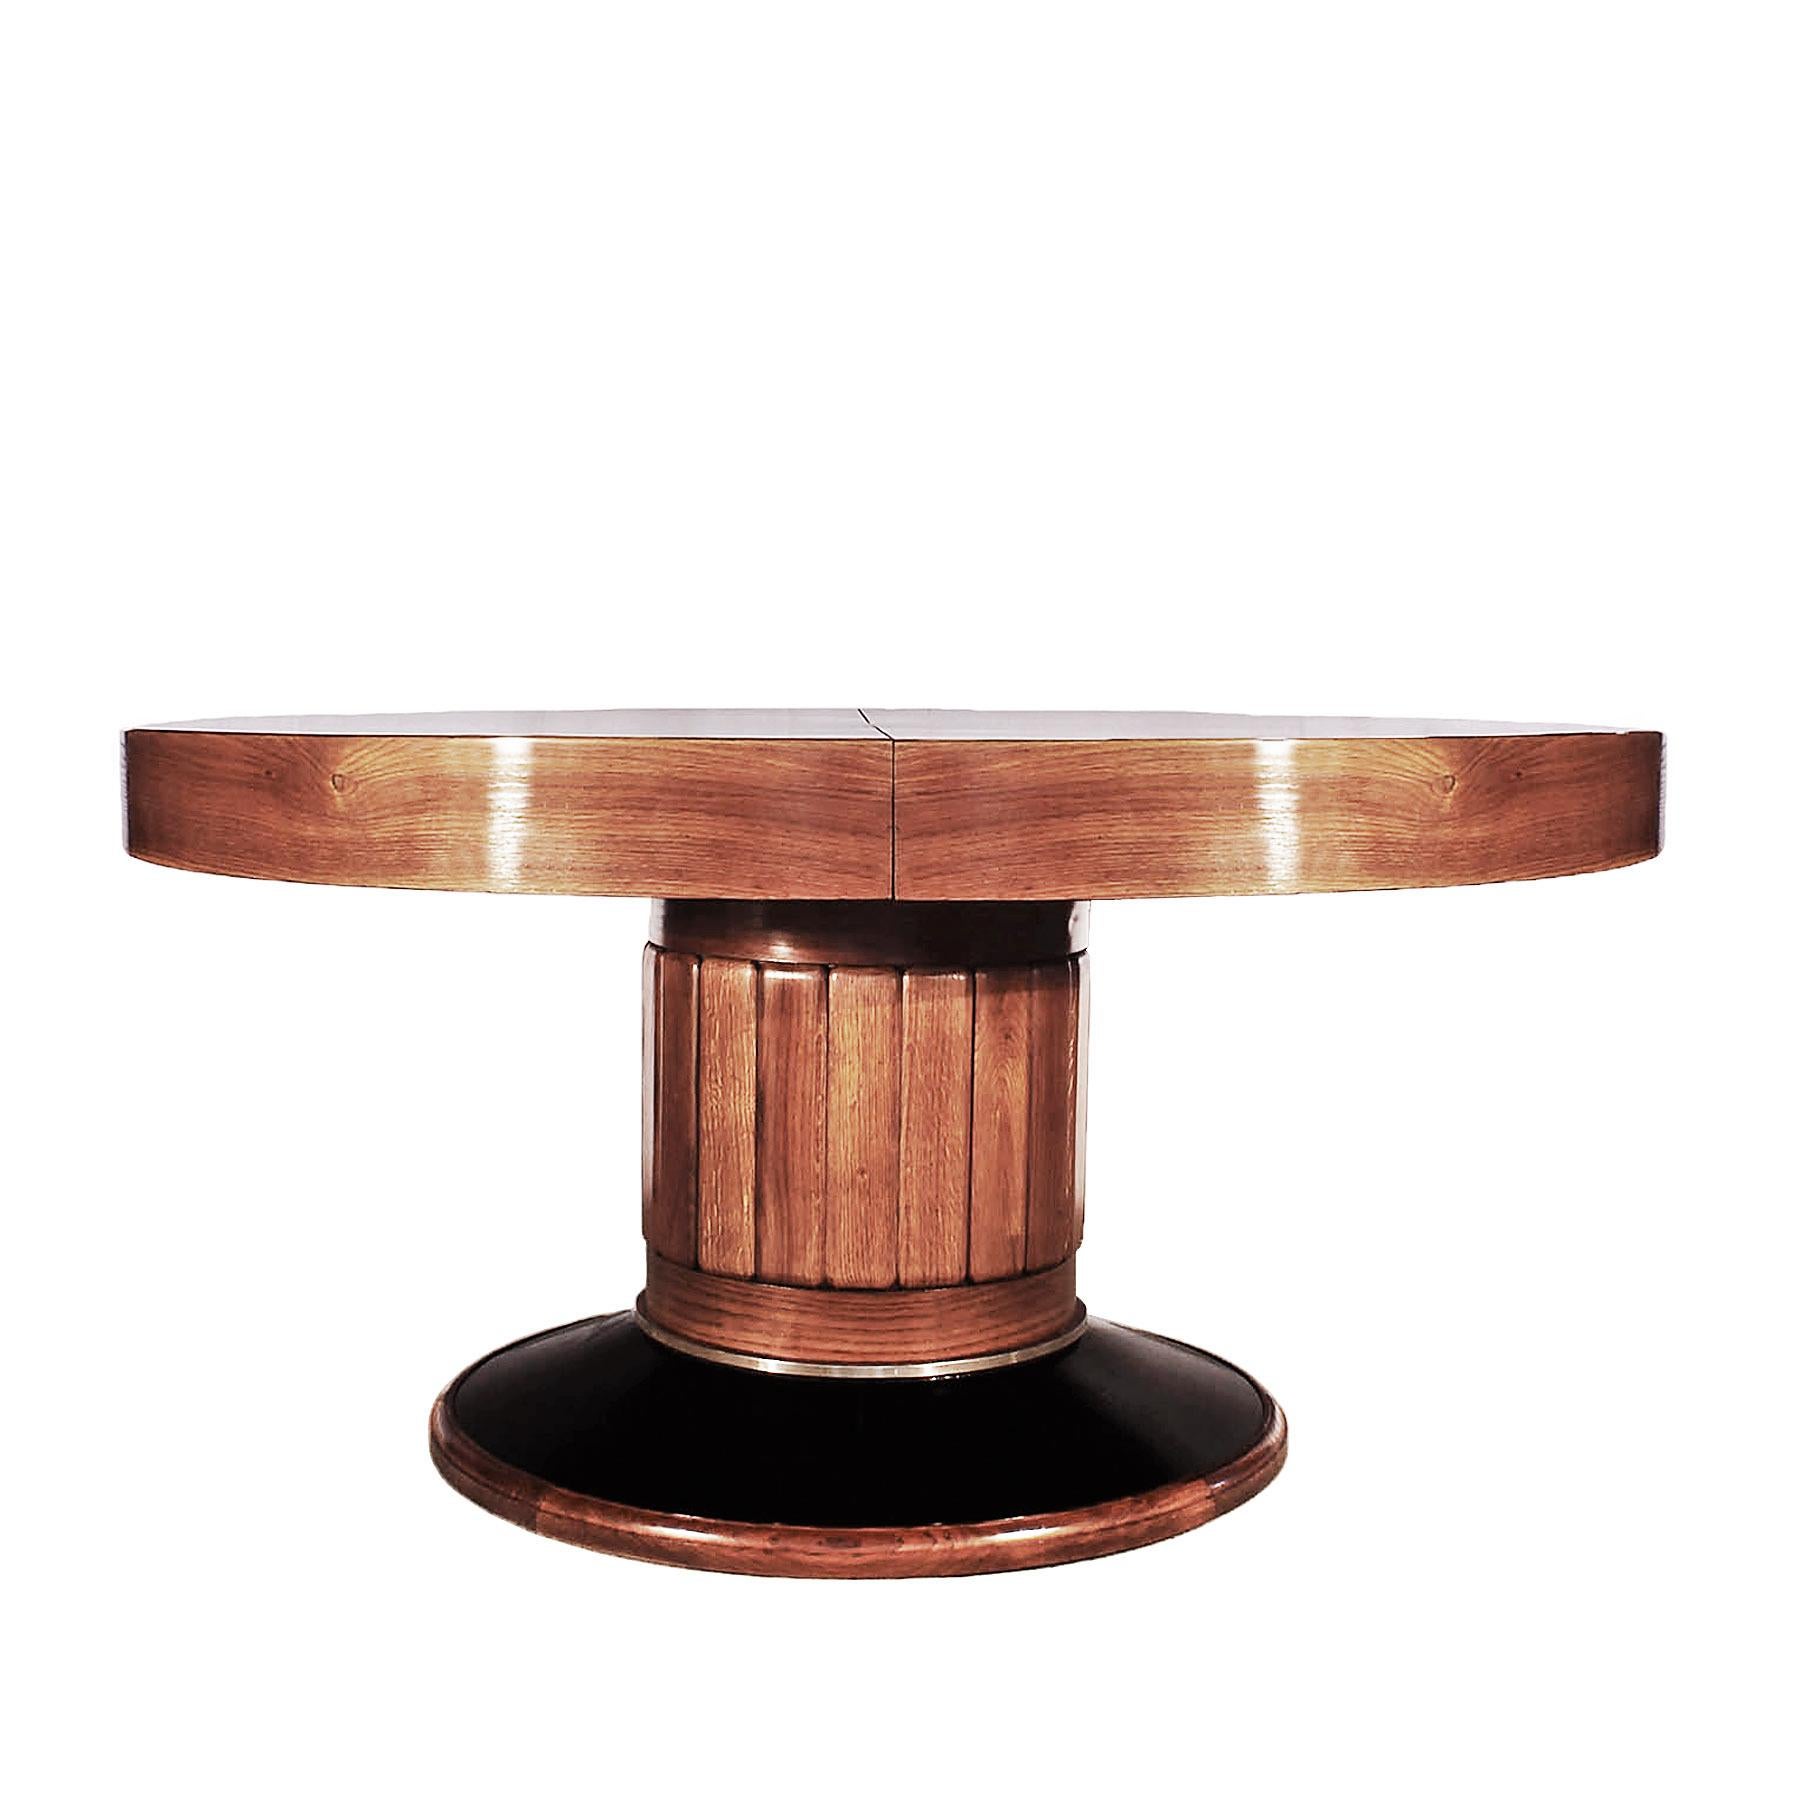 Big Art Deco round table, solid oak with oak veneer marquetry, moulding oak stand with a black stained oak veneer base with a nickel plated brass ring, French polish. Possibility of making leaves up to 120 cm wide, by request.

Spain, Barcelona,